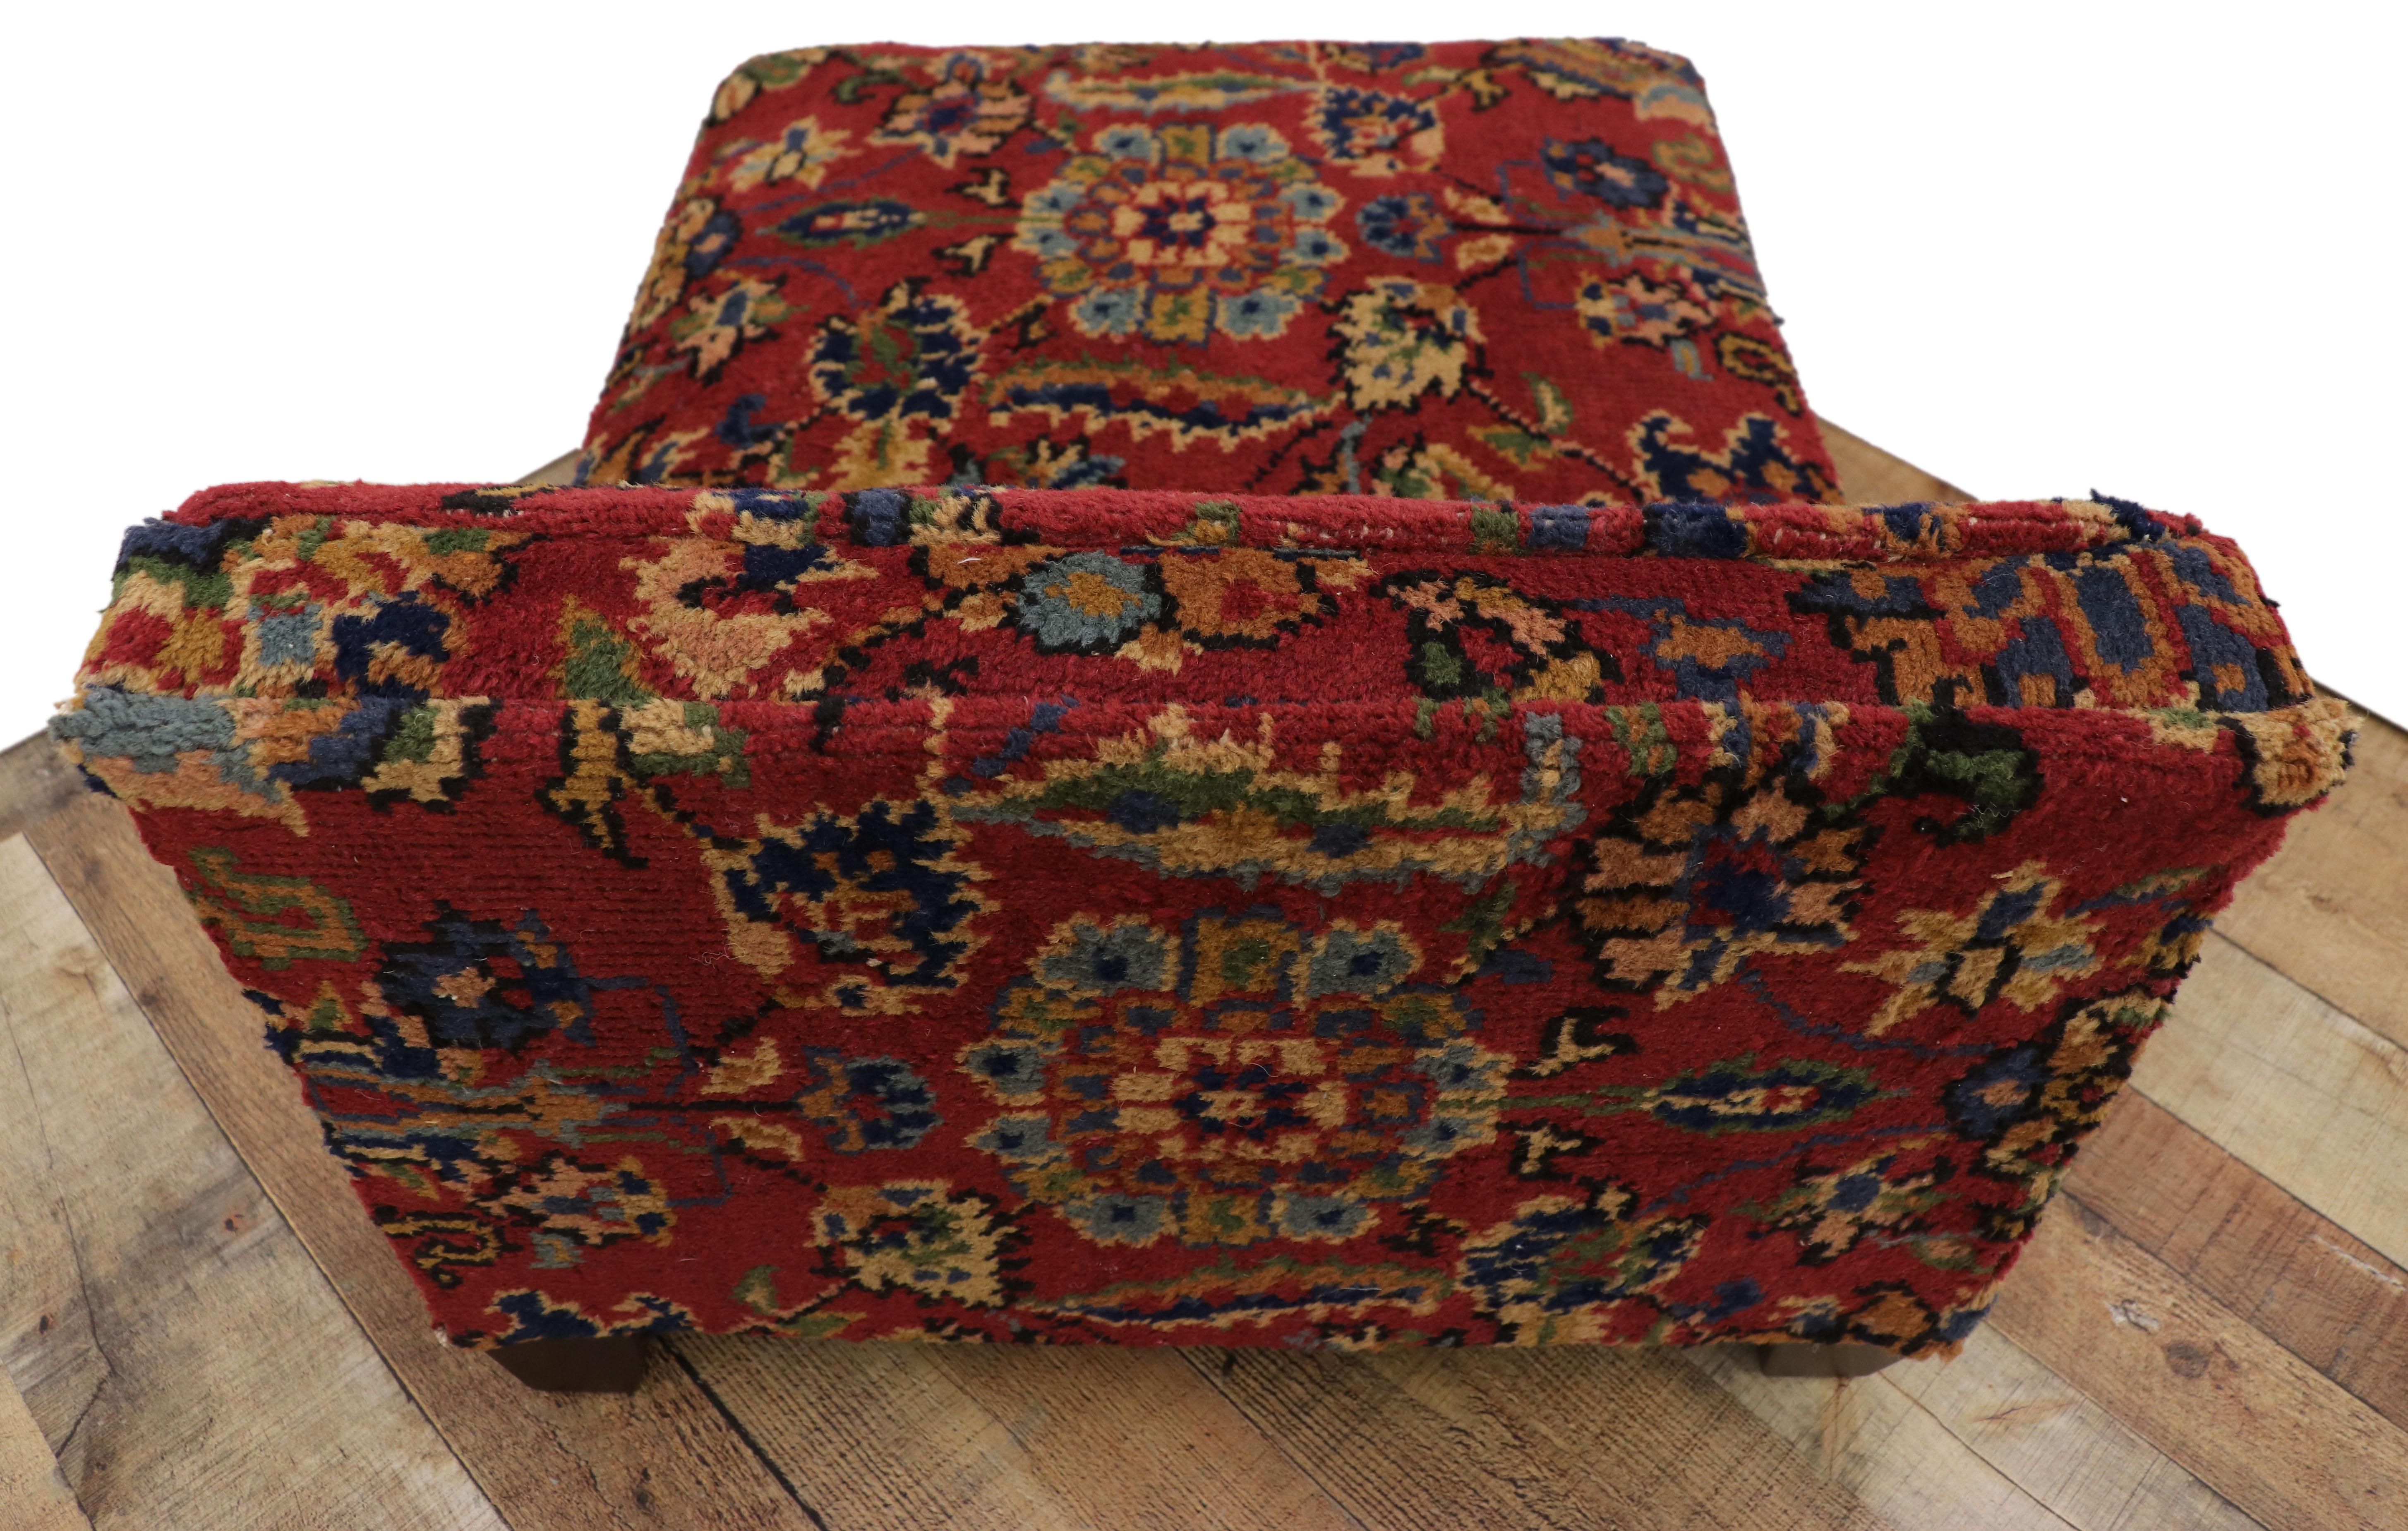 Jacobean Low Profile Upholstered Slipper Chair from Antique Persian Rug or Luxury Petbed